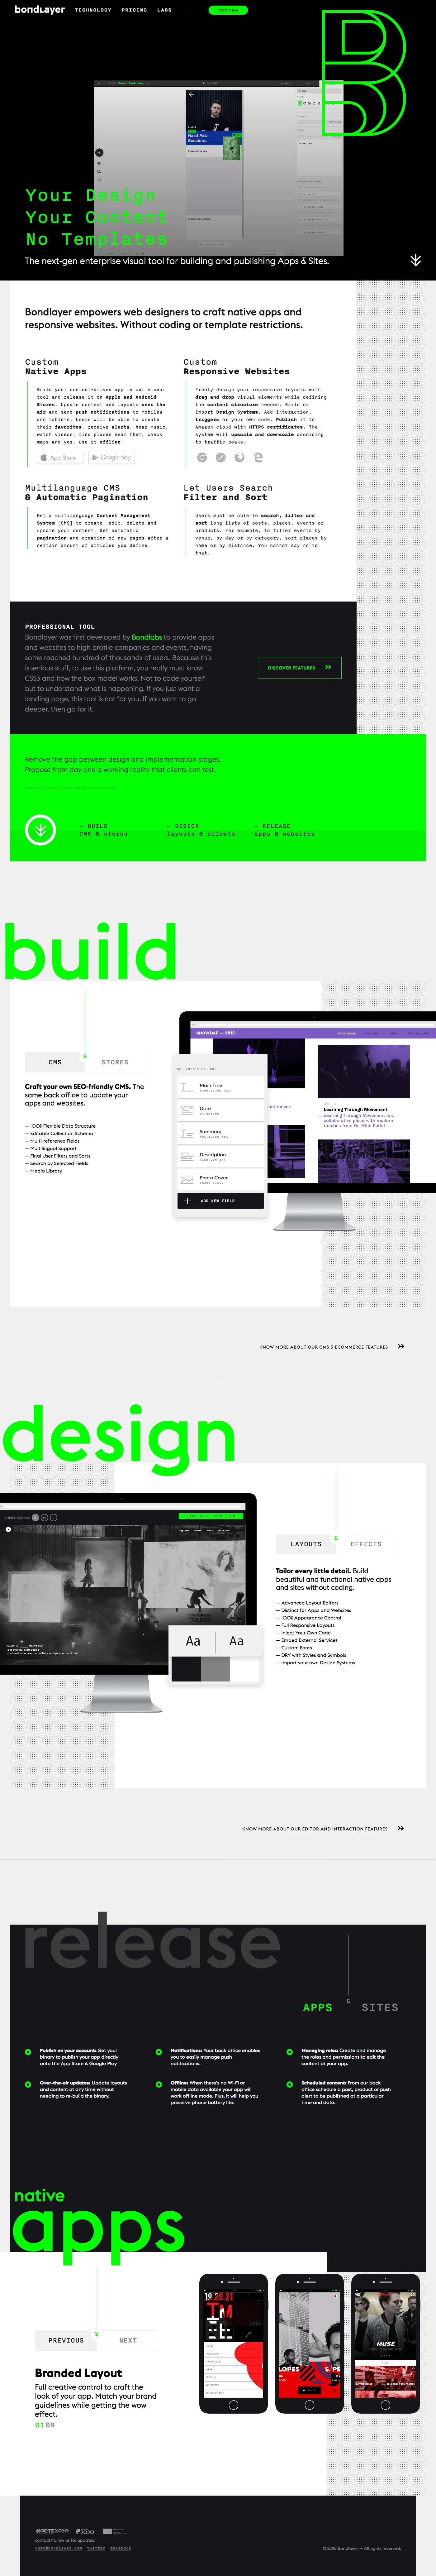 Bondlayer Landing Page Example: The visual tool for custom native apps and responsive websites. Bondlayer empowers web designers to craft native apps and responsive websites. Without coding or template restrictions.